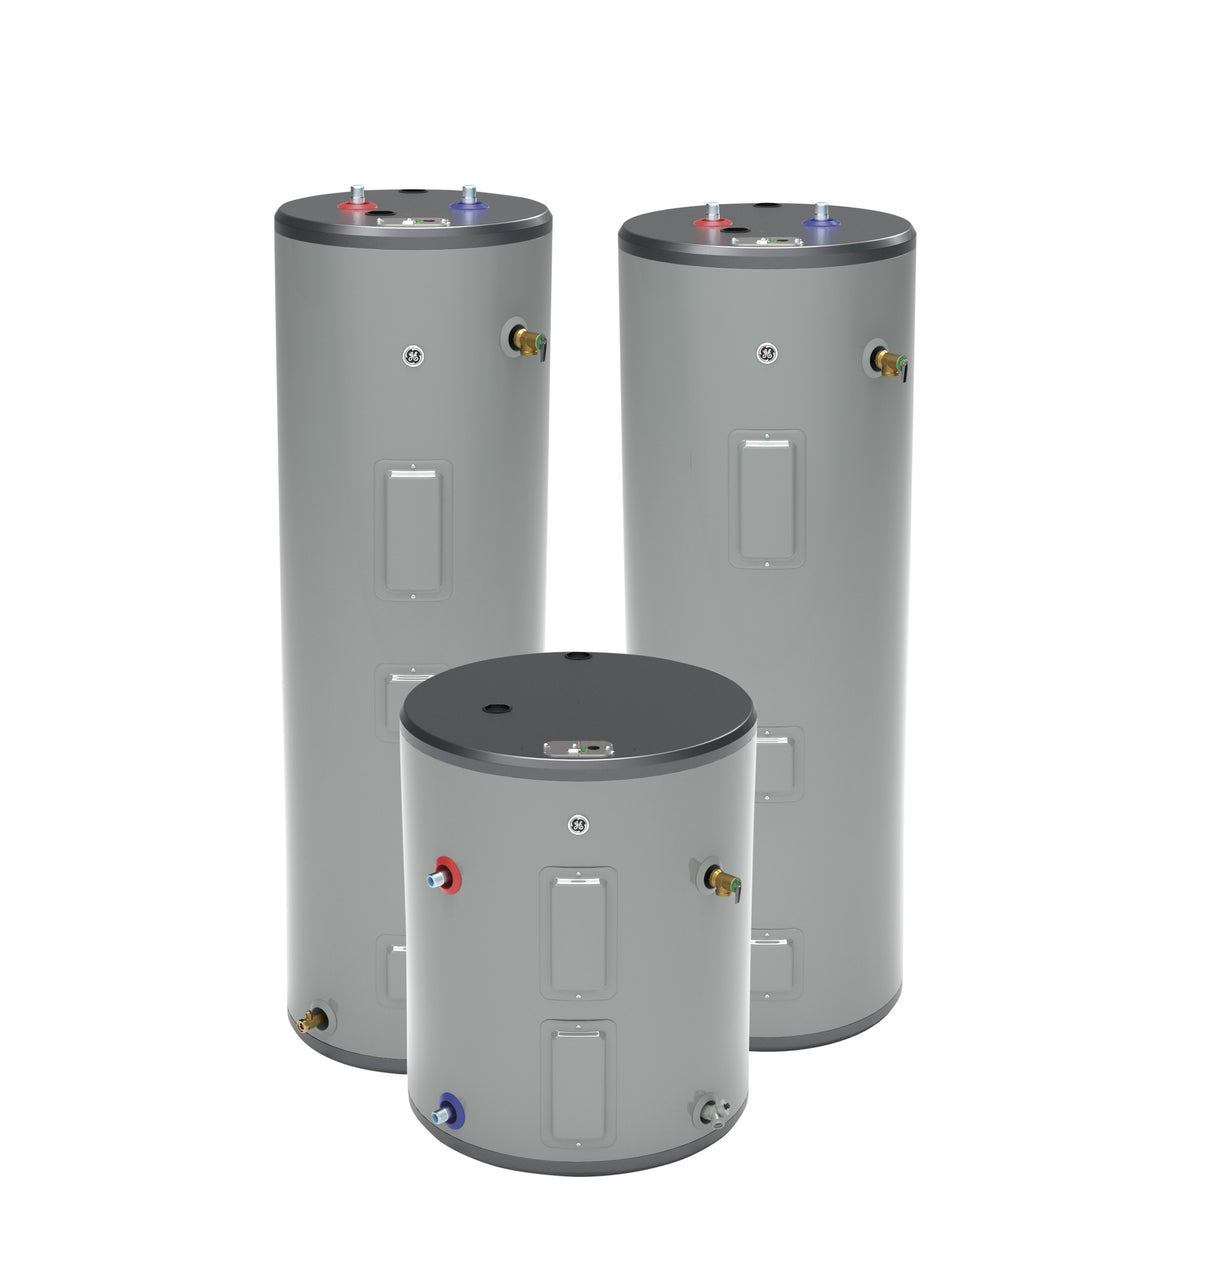 GE(R) 30 Gallon Short Electric Water Heater - (GE30S10BAM)